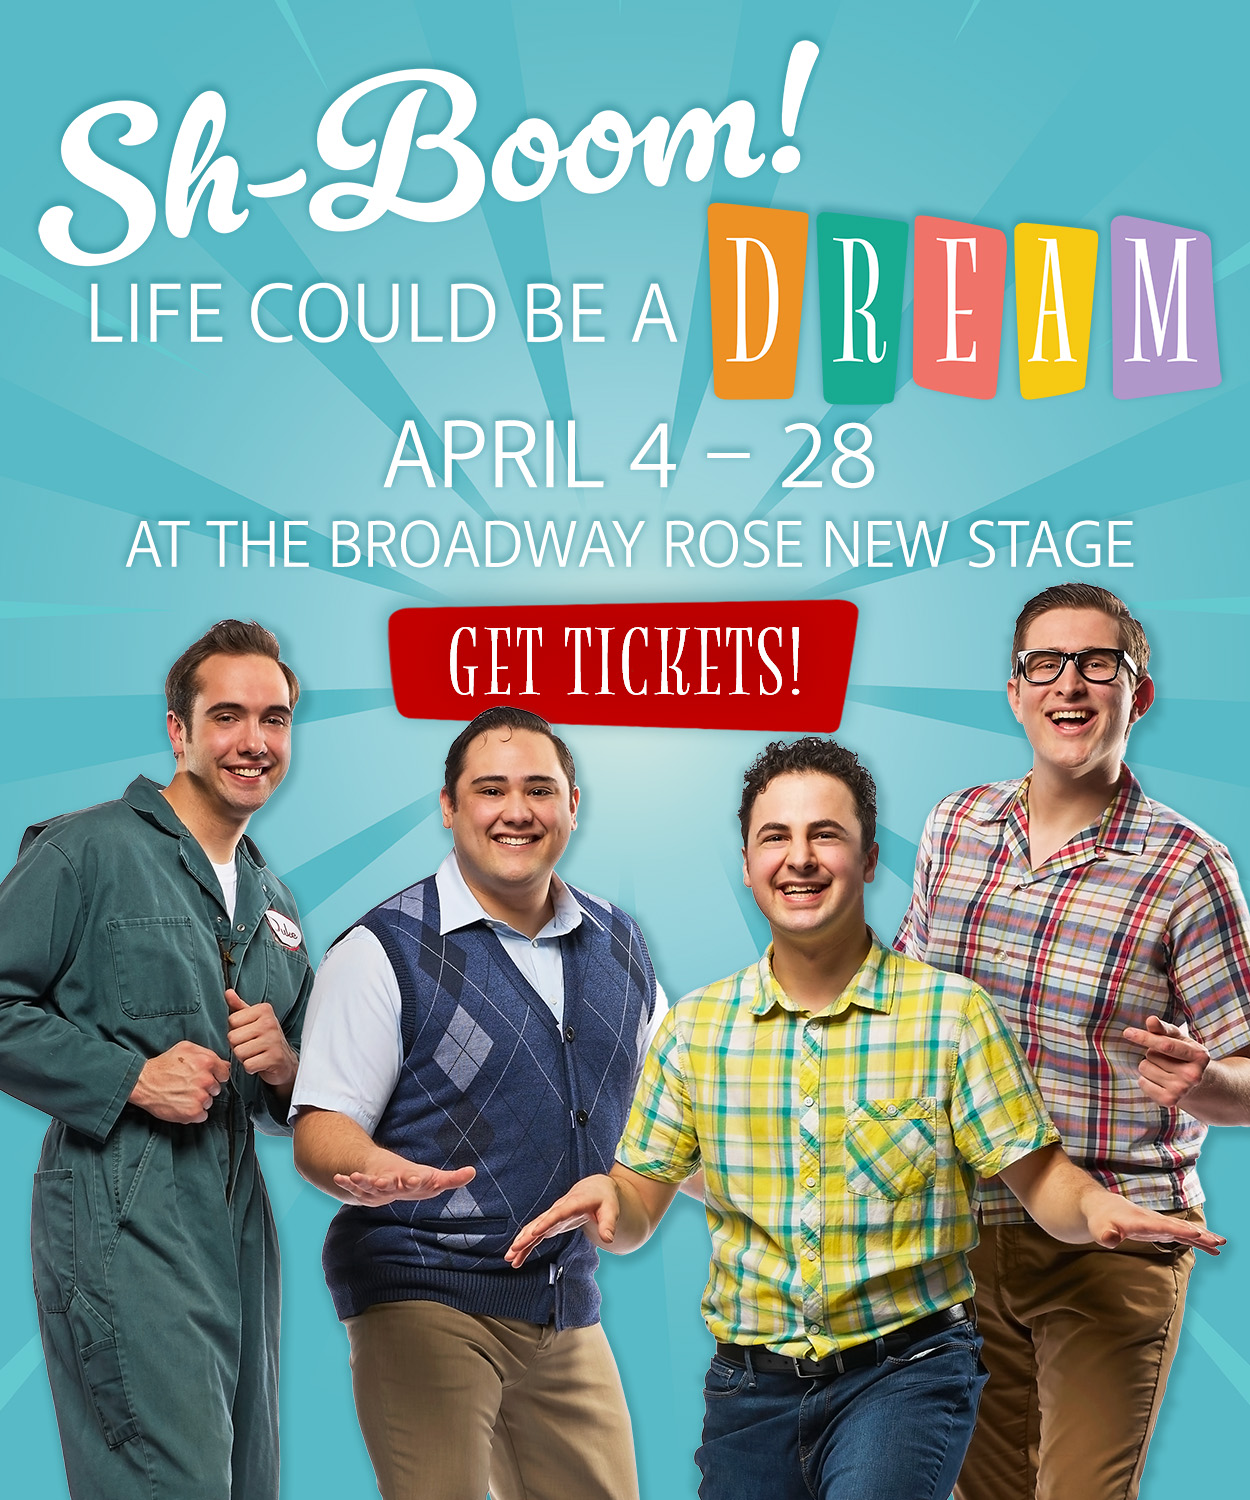 Sh-Boom, Life Could Be a Dream. April 4 through 28. Get tickets by clicking here.